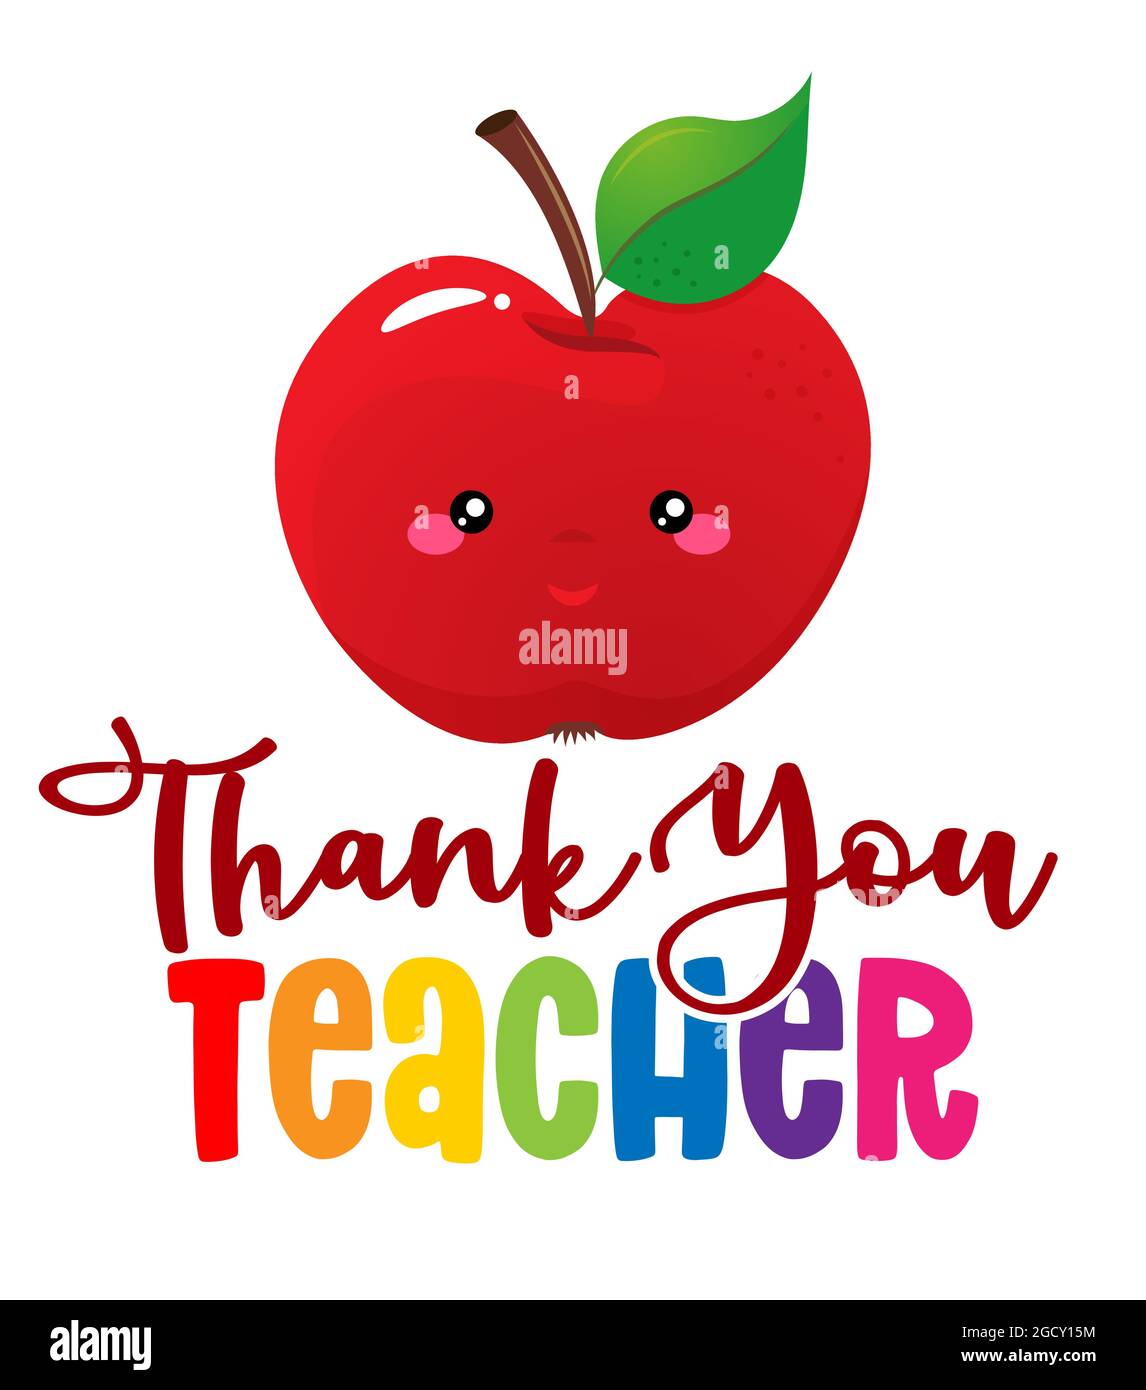 thank you images for teachers